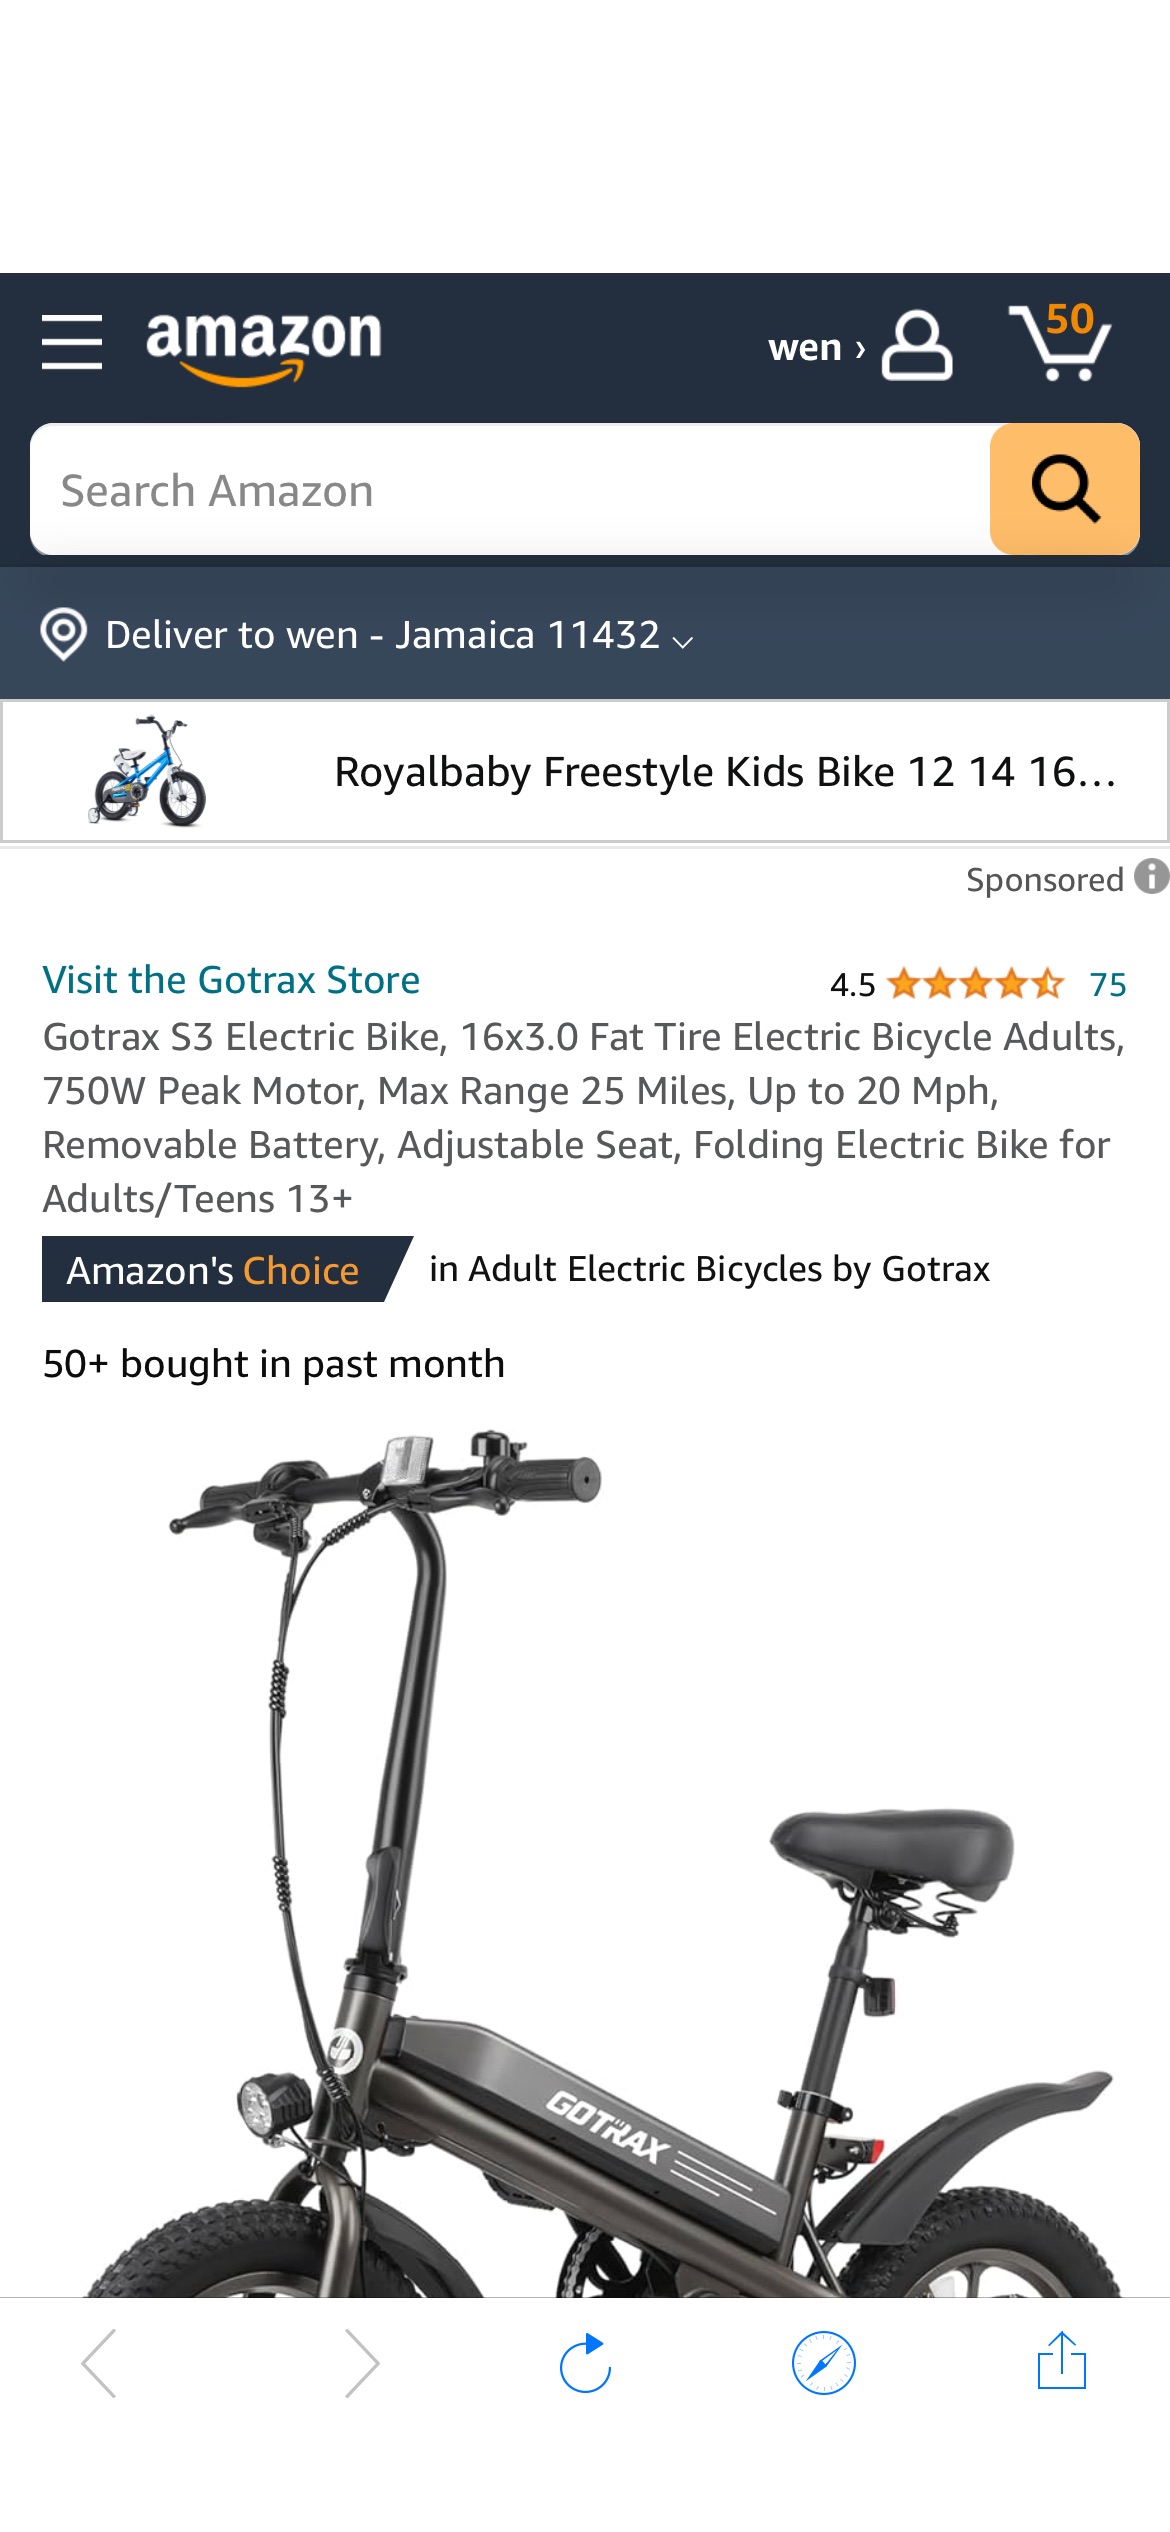 Amazon.com : Gotrax S3 Electric Bike, 16x3.0 Fat Tire Electric Bicycle Adults, 750W Peak Motor, Max Range 25 Miles, Up to 20 Mph, Removable Battery, Adjustable Seat, Folding Electric Bike for Adults/T